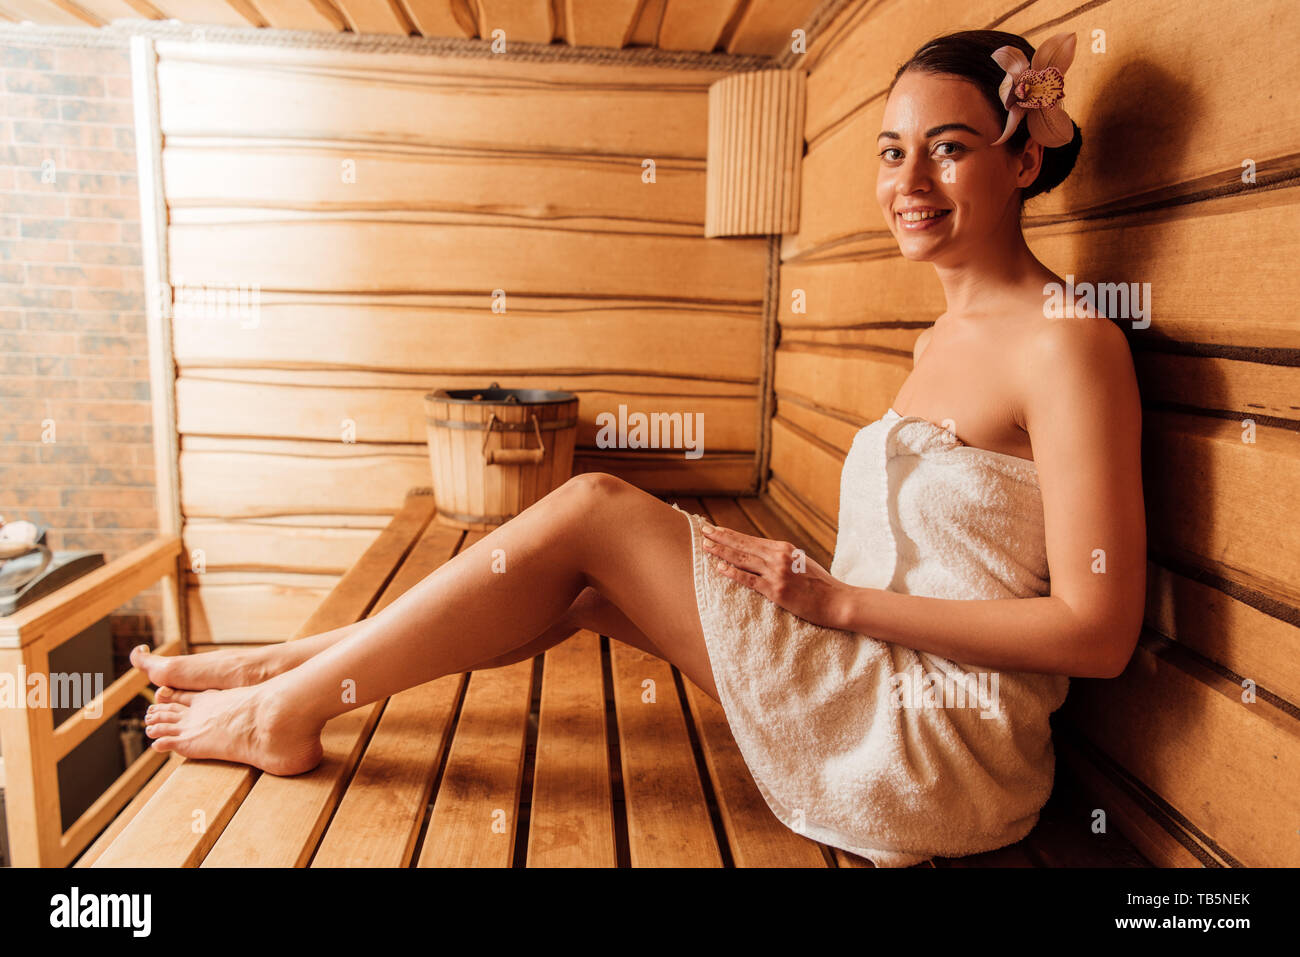 smiling woman in towel with flower in hair in sauna Stock Photo